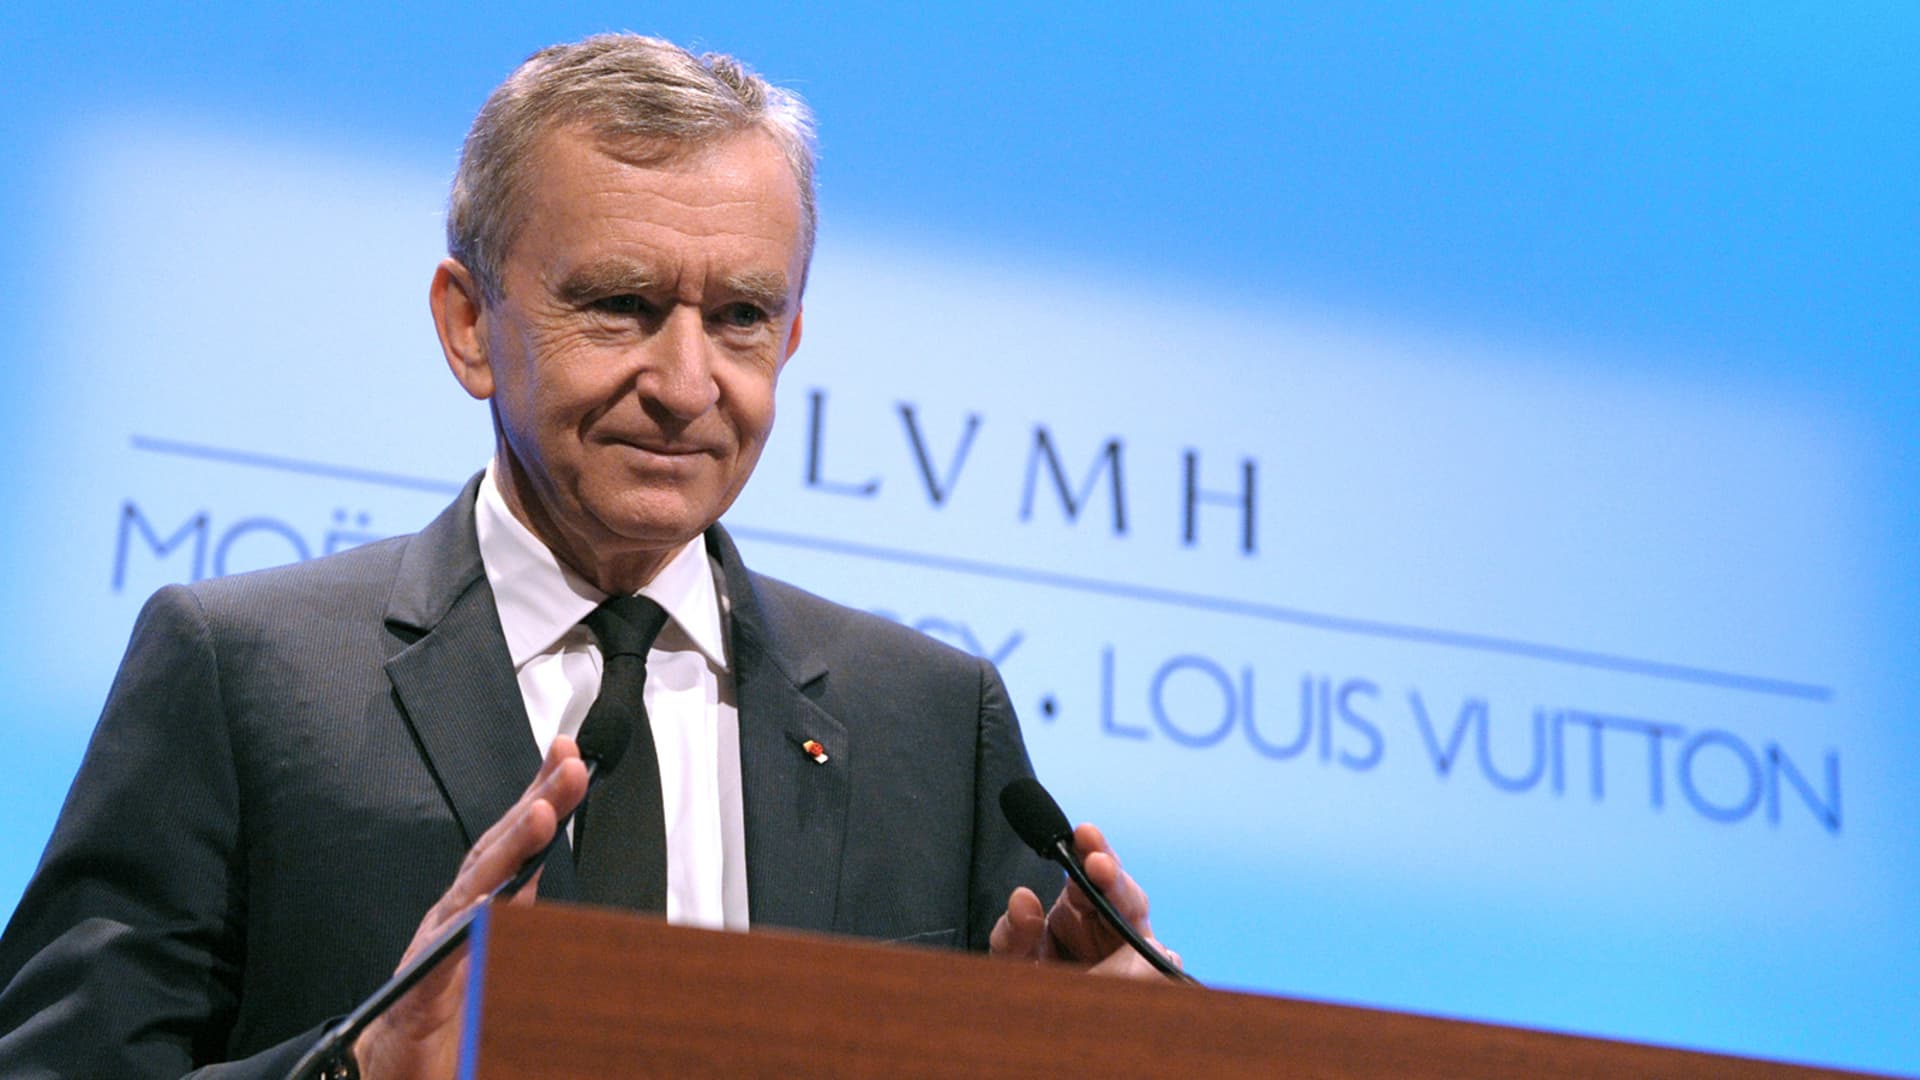 LVMH Faces Fine After Brawl With Hermes in Luxury Aisle